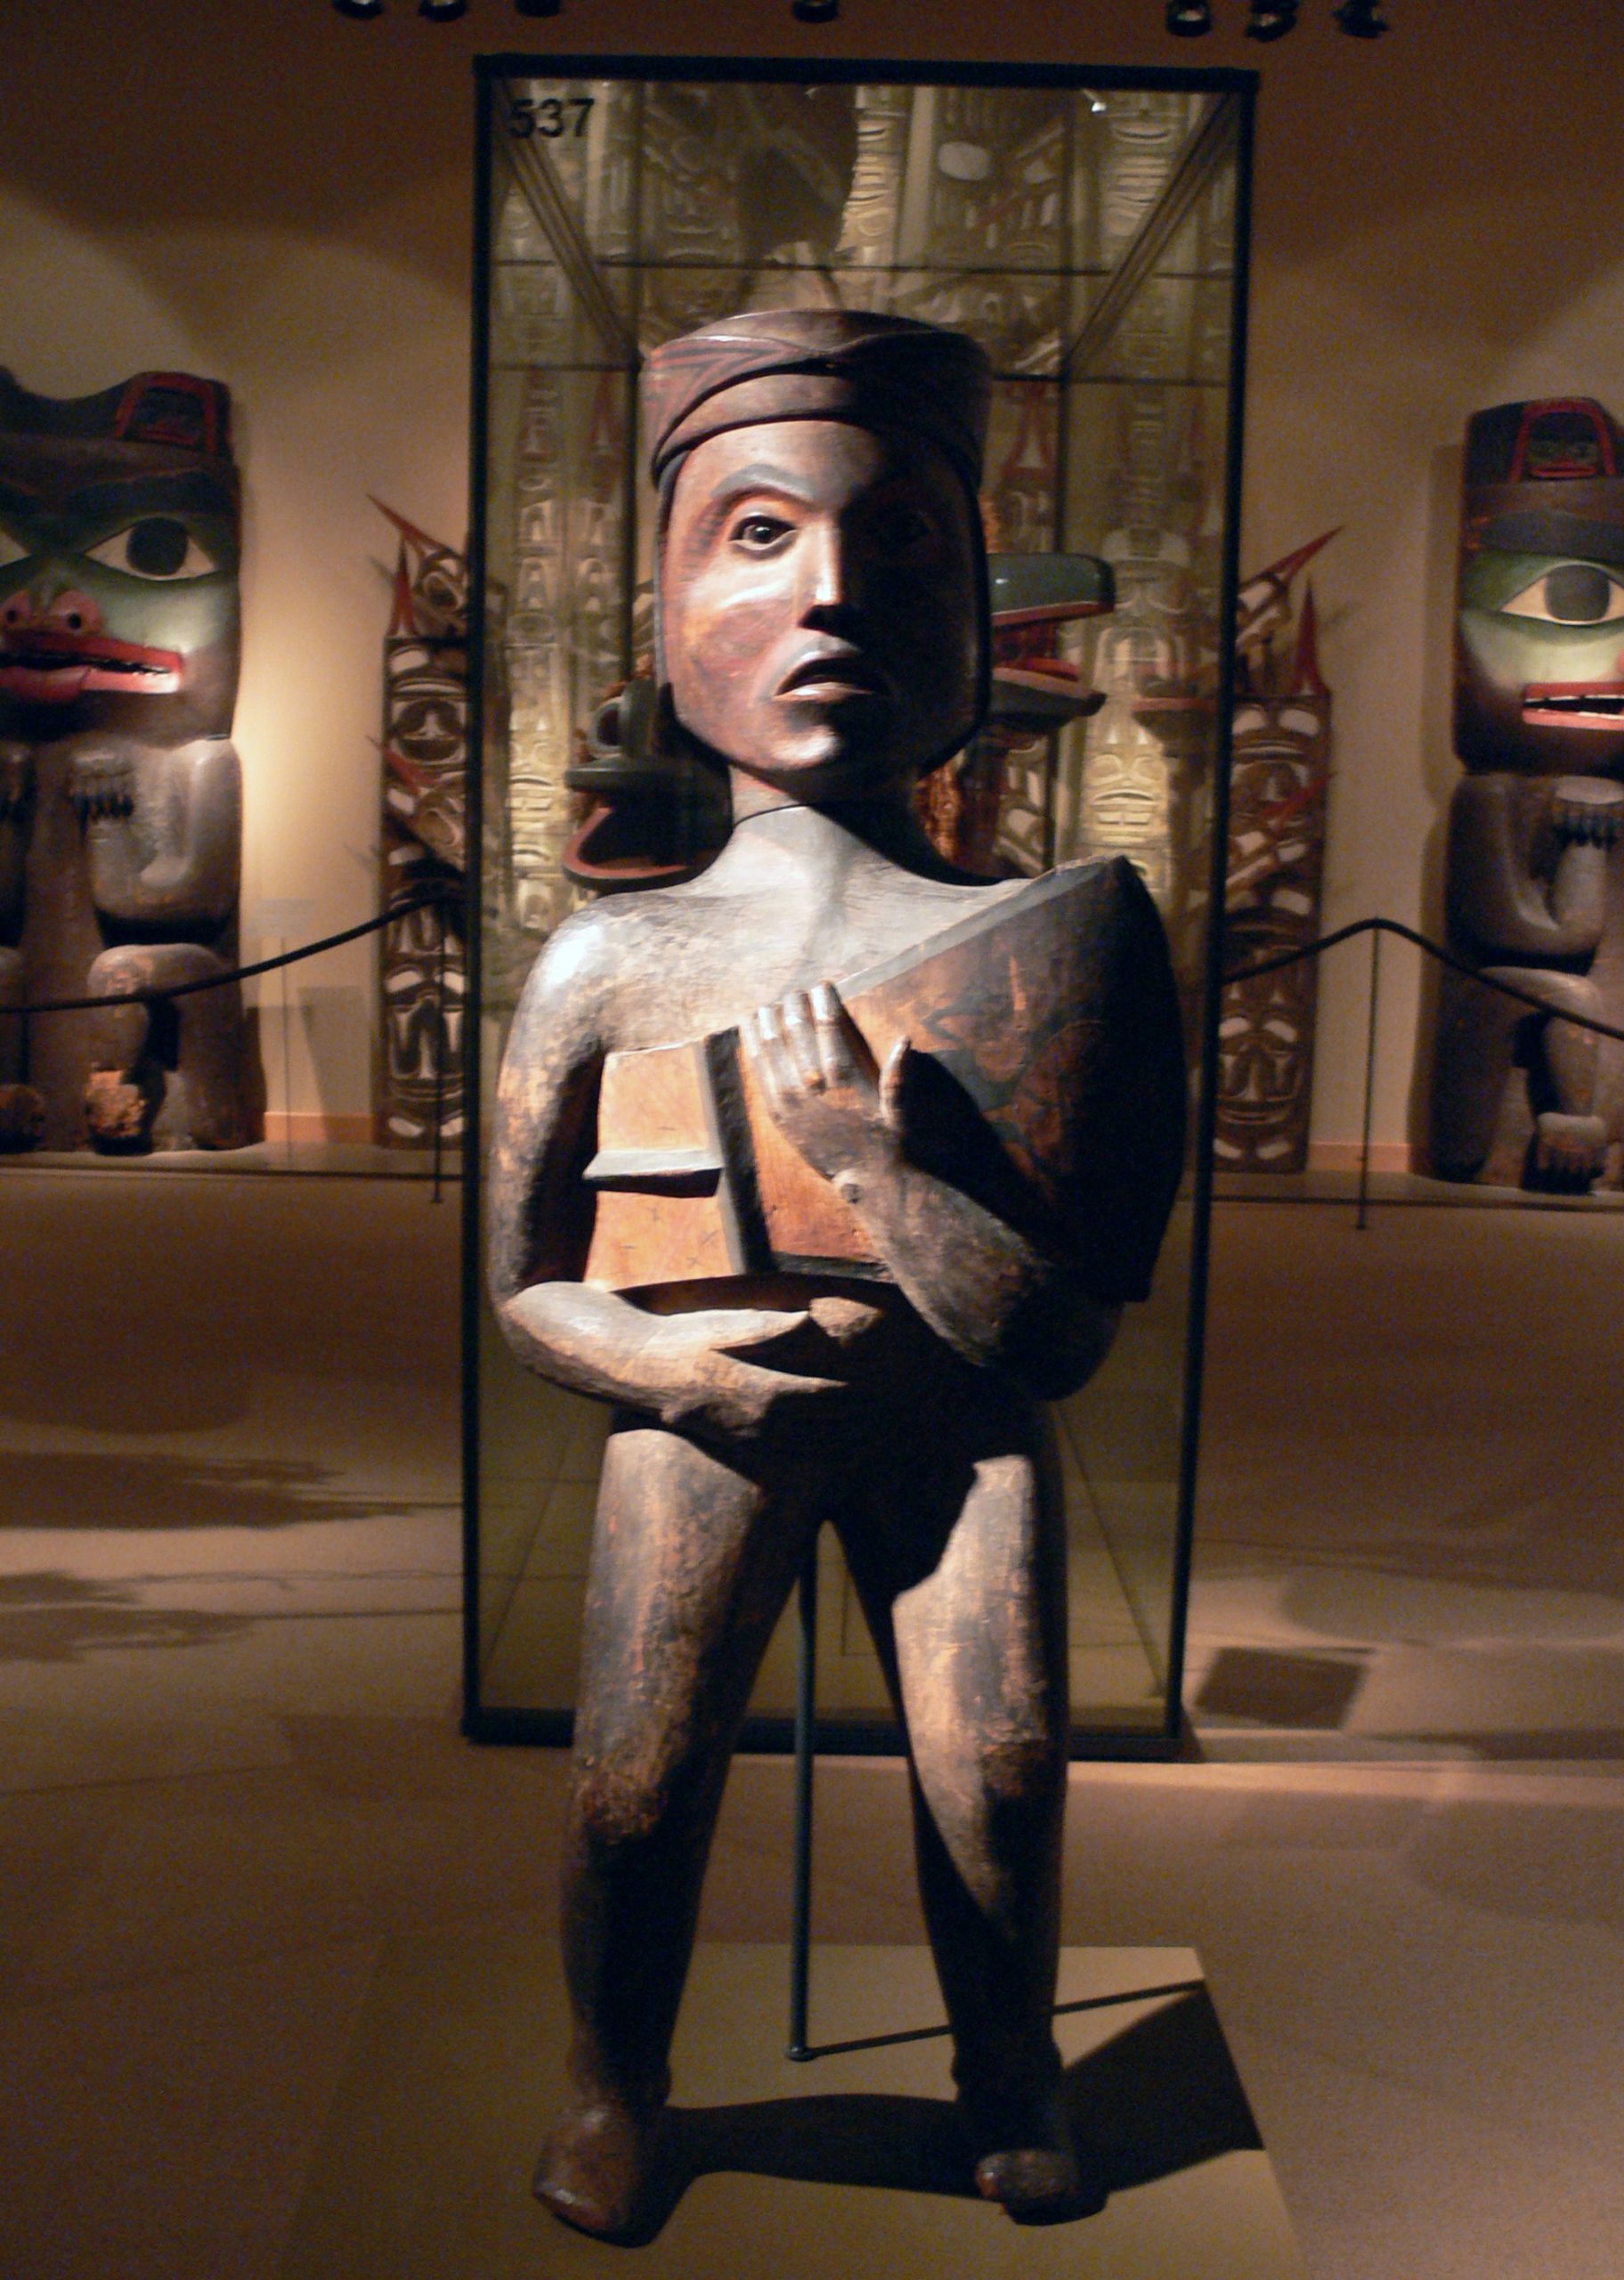 Metal statue of a man holding a copper shield in a museum. Behind the statue are Indigenous carvings.